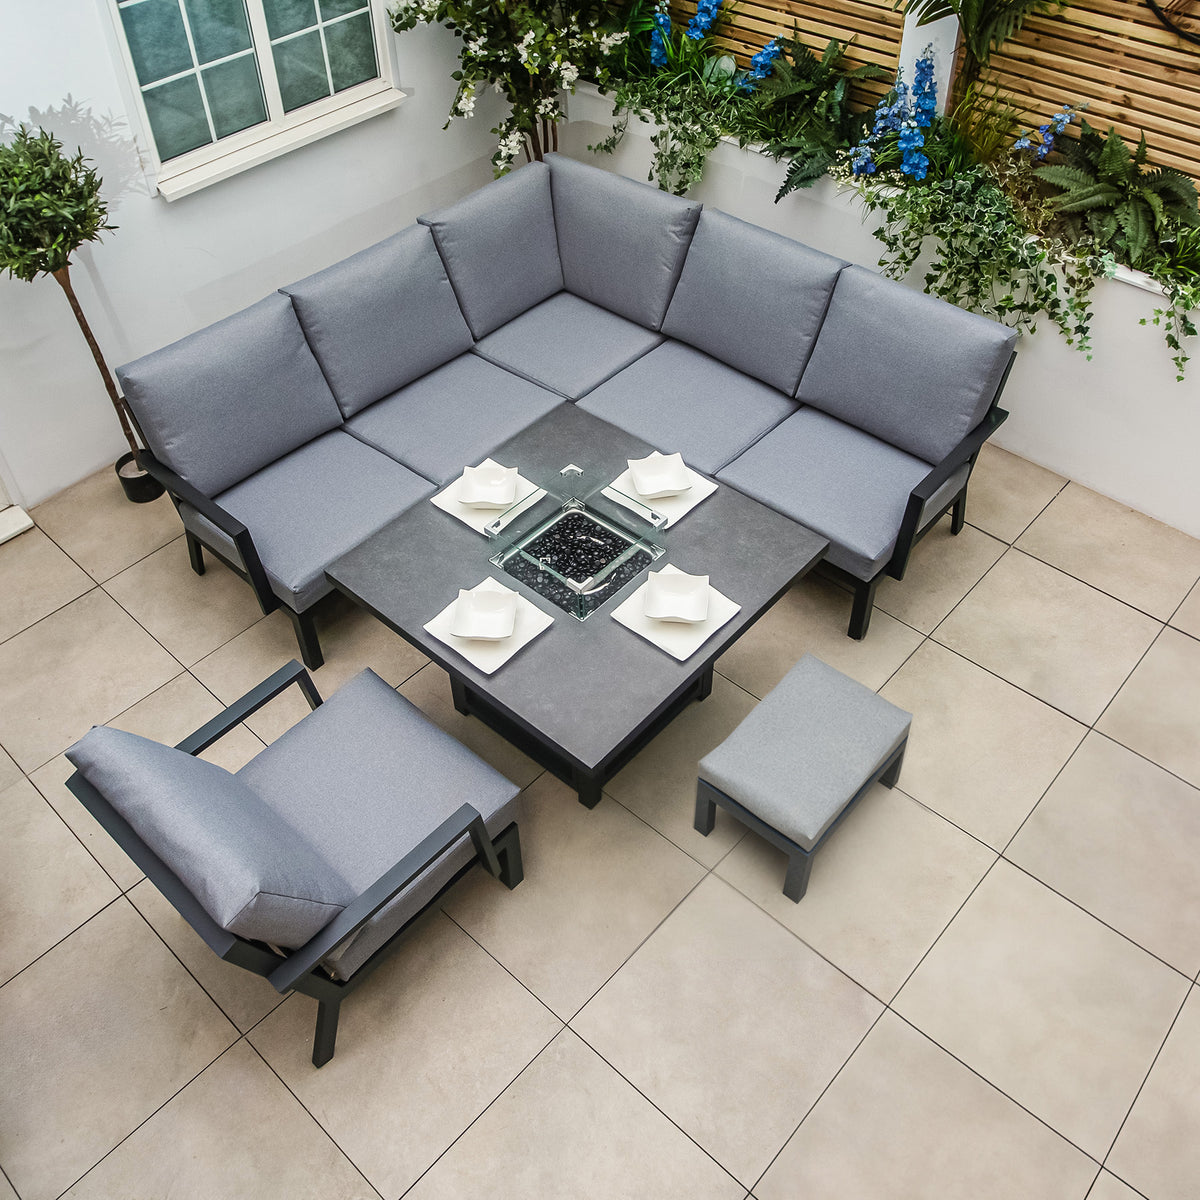 Bracken Outdoors Miami Dark Aluminium Compact Corner Set with Fire Pit Table and Bench and Arm Chair